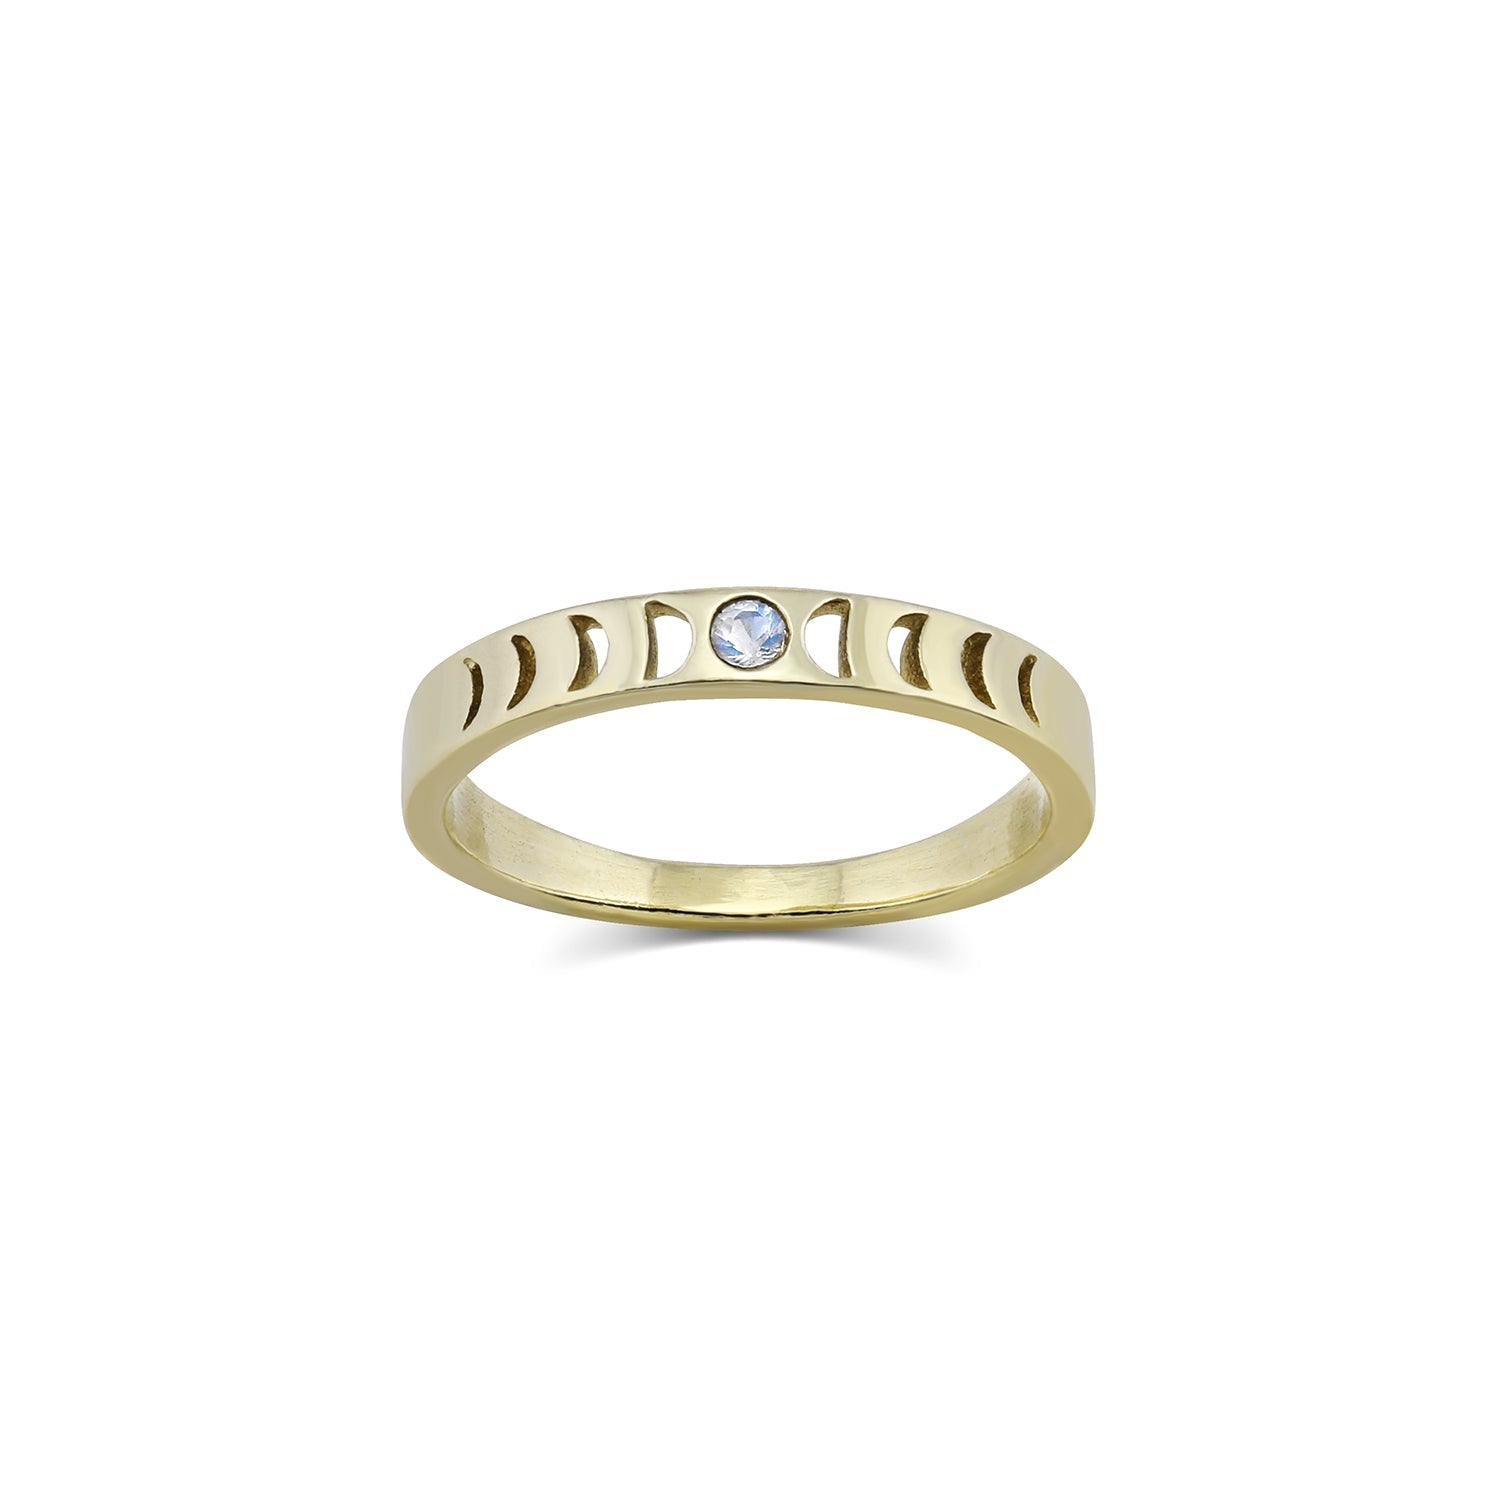 Moon Phase Rings moon phase rings > stacking rings > wedding bands > gender neutral bands > rose cut diamond ring > promise rings >lunar phase ring > moon ring > phases of the moon ring 4.5 / 14k green gold 'electrum' Original Moon phase Ring || Rainbow Moonstone